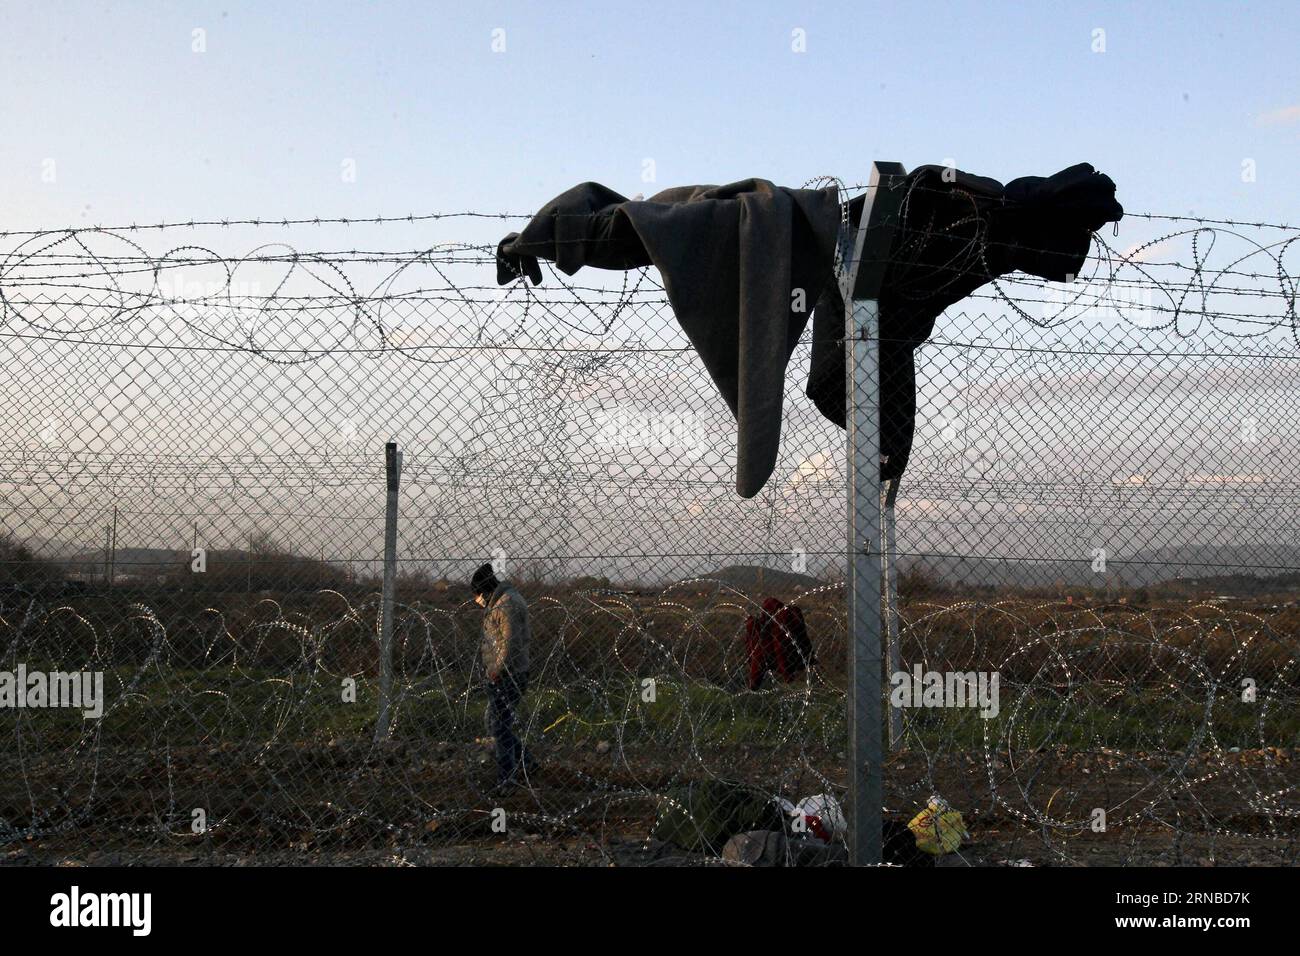 (160301) -- ATHENS, Mar. 1, 2016 -- Refugees wait to cross the border between Greece and Former Yugoslav Republic of Macedonia (FYROM) in Idomeni, Greece, March 1, 2016. The situation in Idomeni is becoming dramatic as more than 9,000 refugees are camped by the borderline, hoping to cross and carry on their journeys. ) GREECE-IDOMENI-REFUGEES MariosxLolos PUBLICATIONxNOTxINxCHN   Athens Mar 1 2016 Refugees Wait to Cross The Border between Greece and Former Yugoslav Republic of Macedonia FYROM in Idomeni Greece March 1 2016 The Situation in Idomeni IS Becoming Dramatic As More than 9 000 Refuge Stock Photo